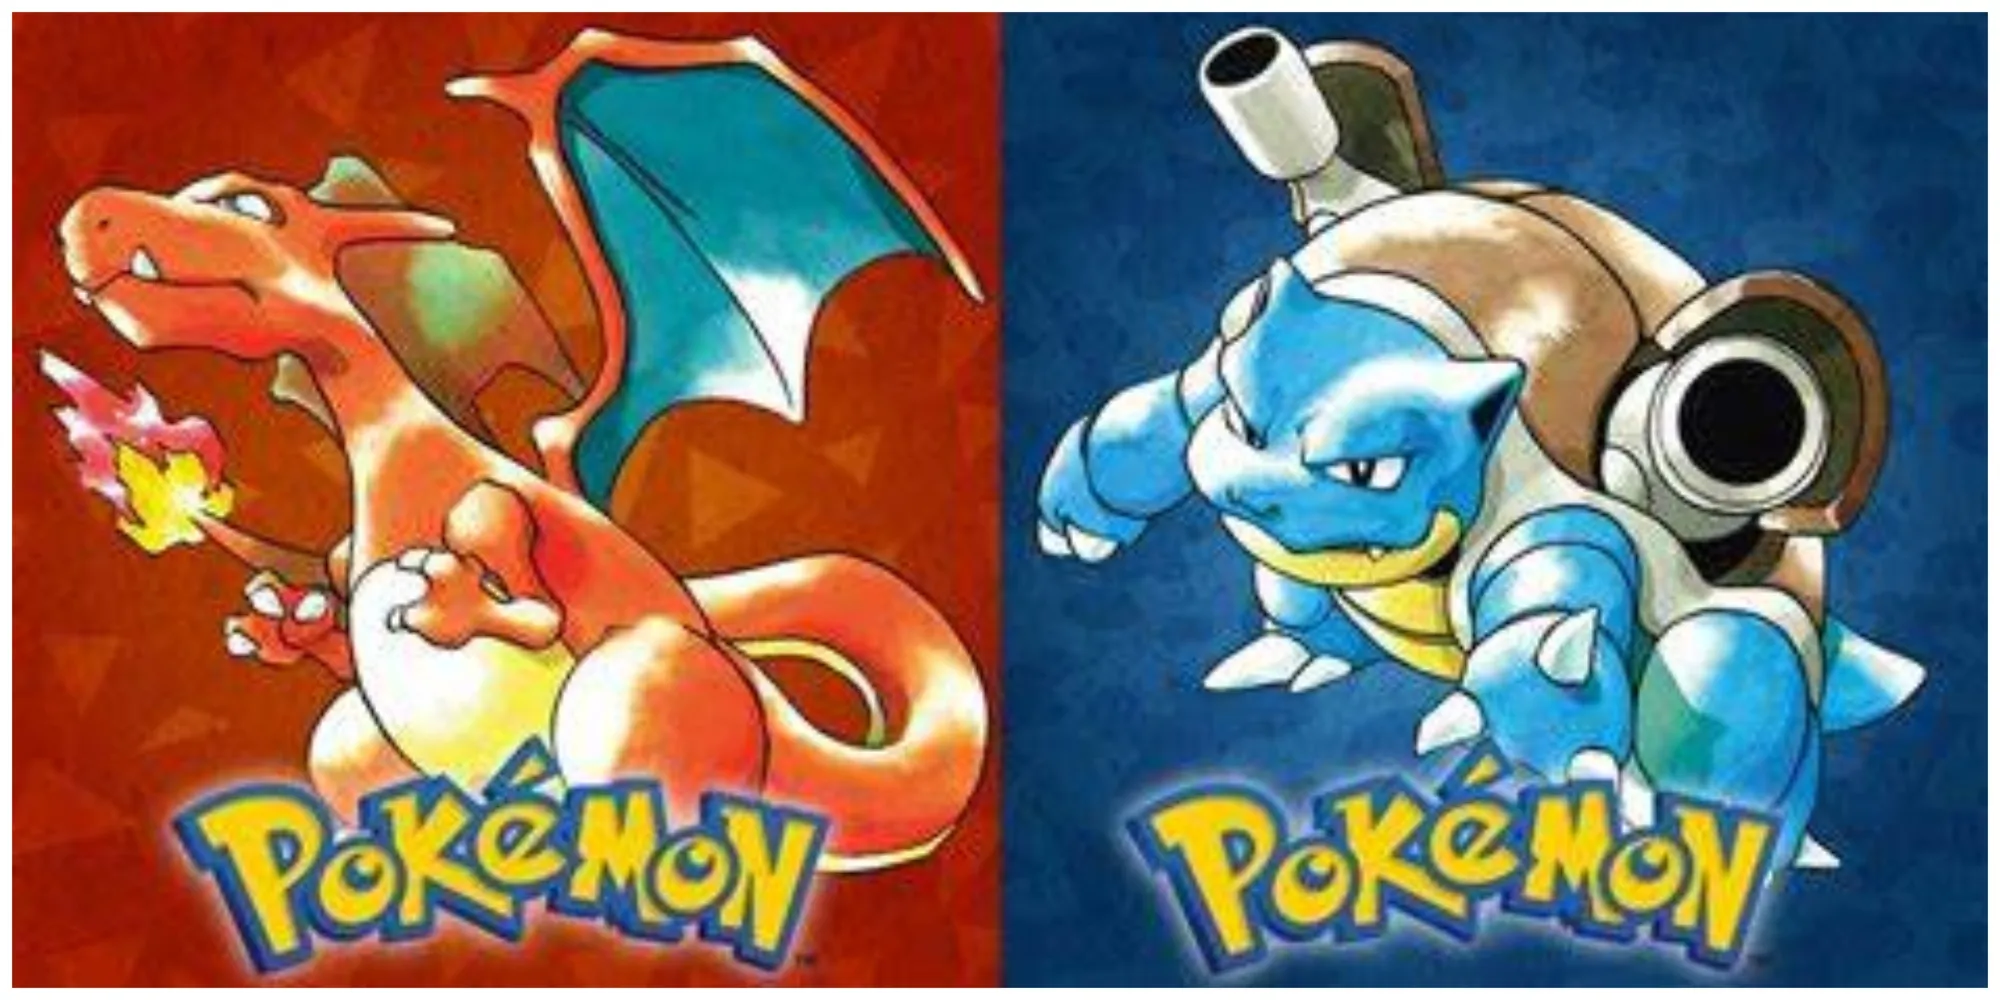 Game Boy Pokemon Red and Blue